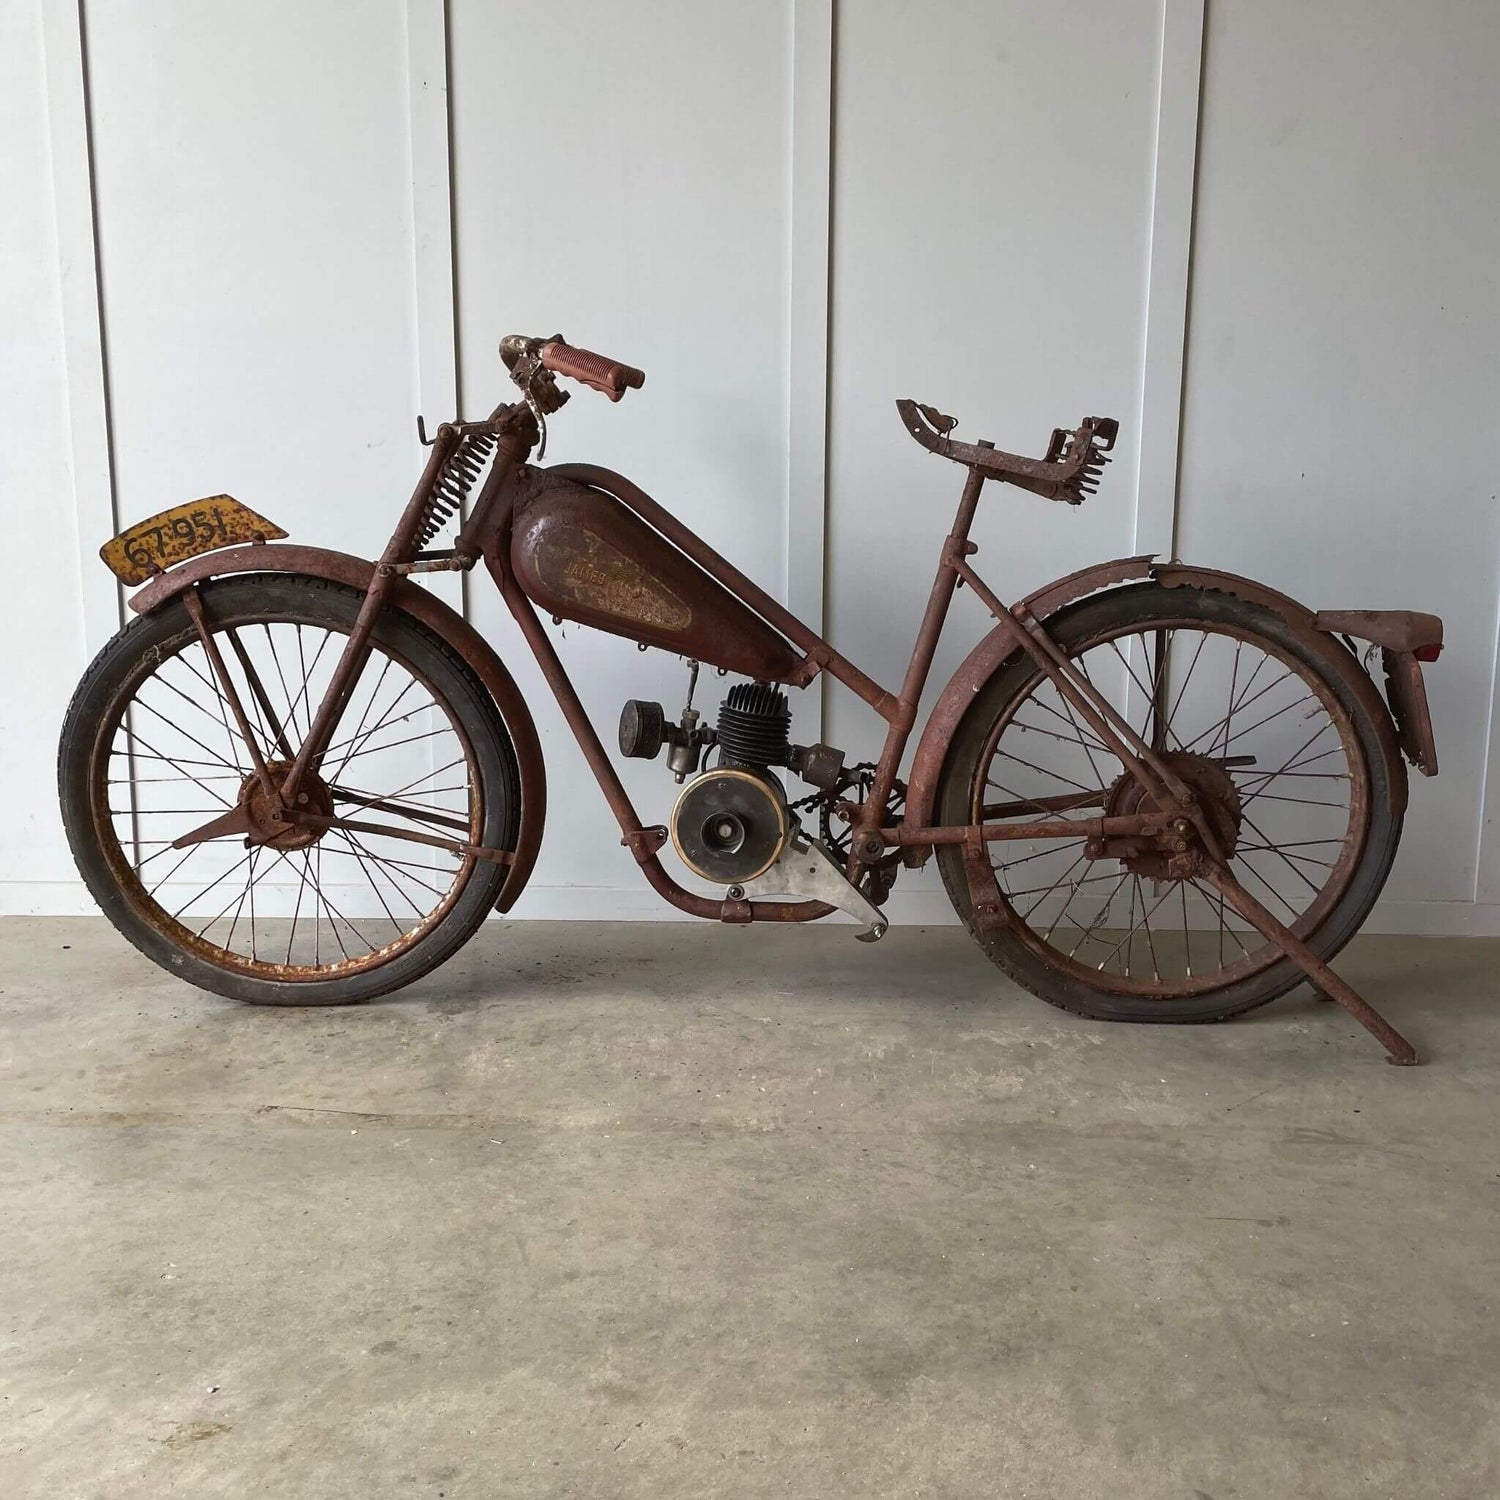 Antique and collectible James Autocycle